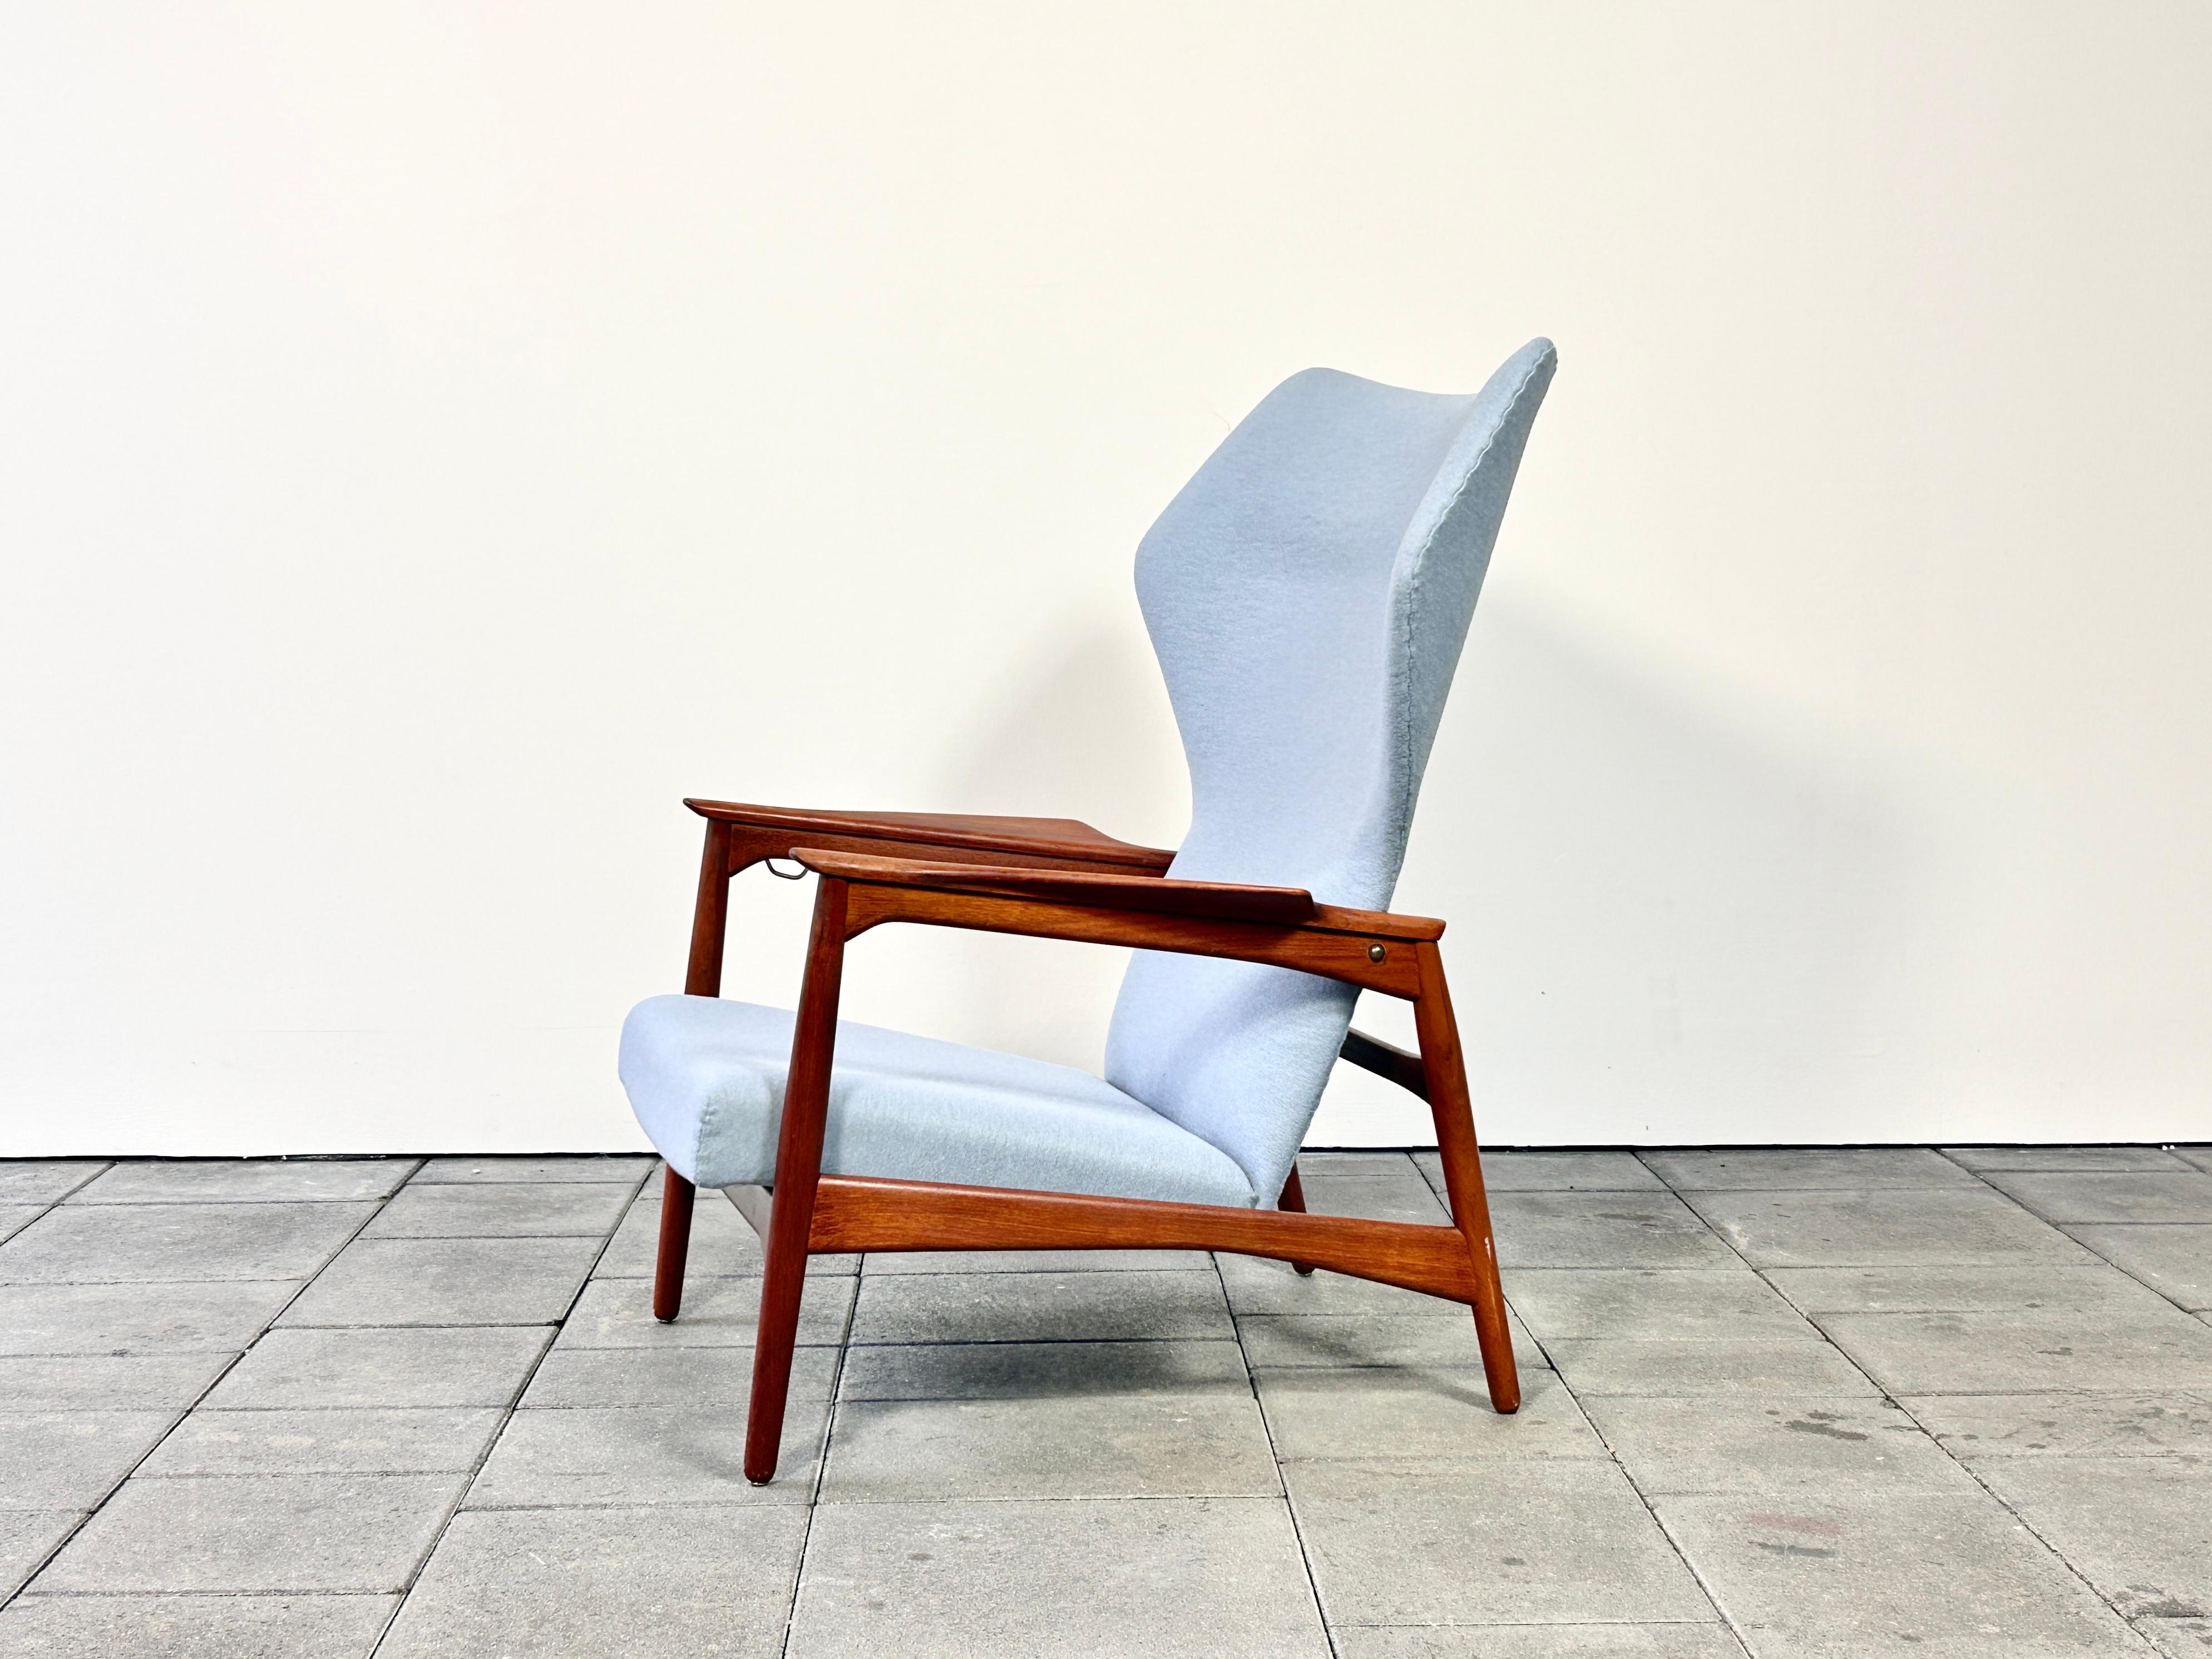 Carlo Wingback Lounge Chair designed by Ib Kofod Larsen 1954 In Good Condition For Sale In Offenburg, Baden Wurthemberg